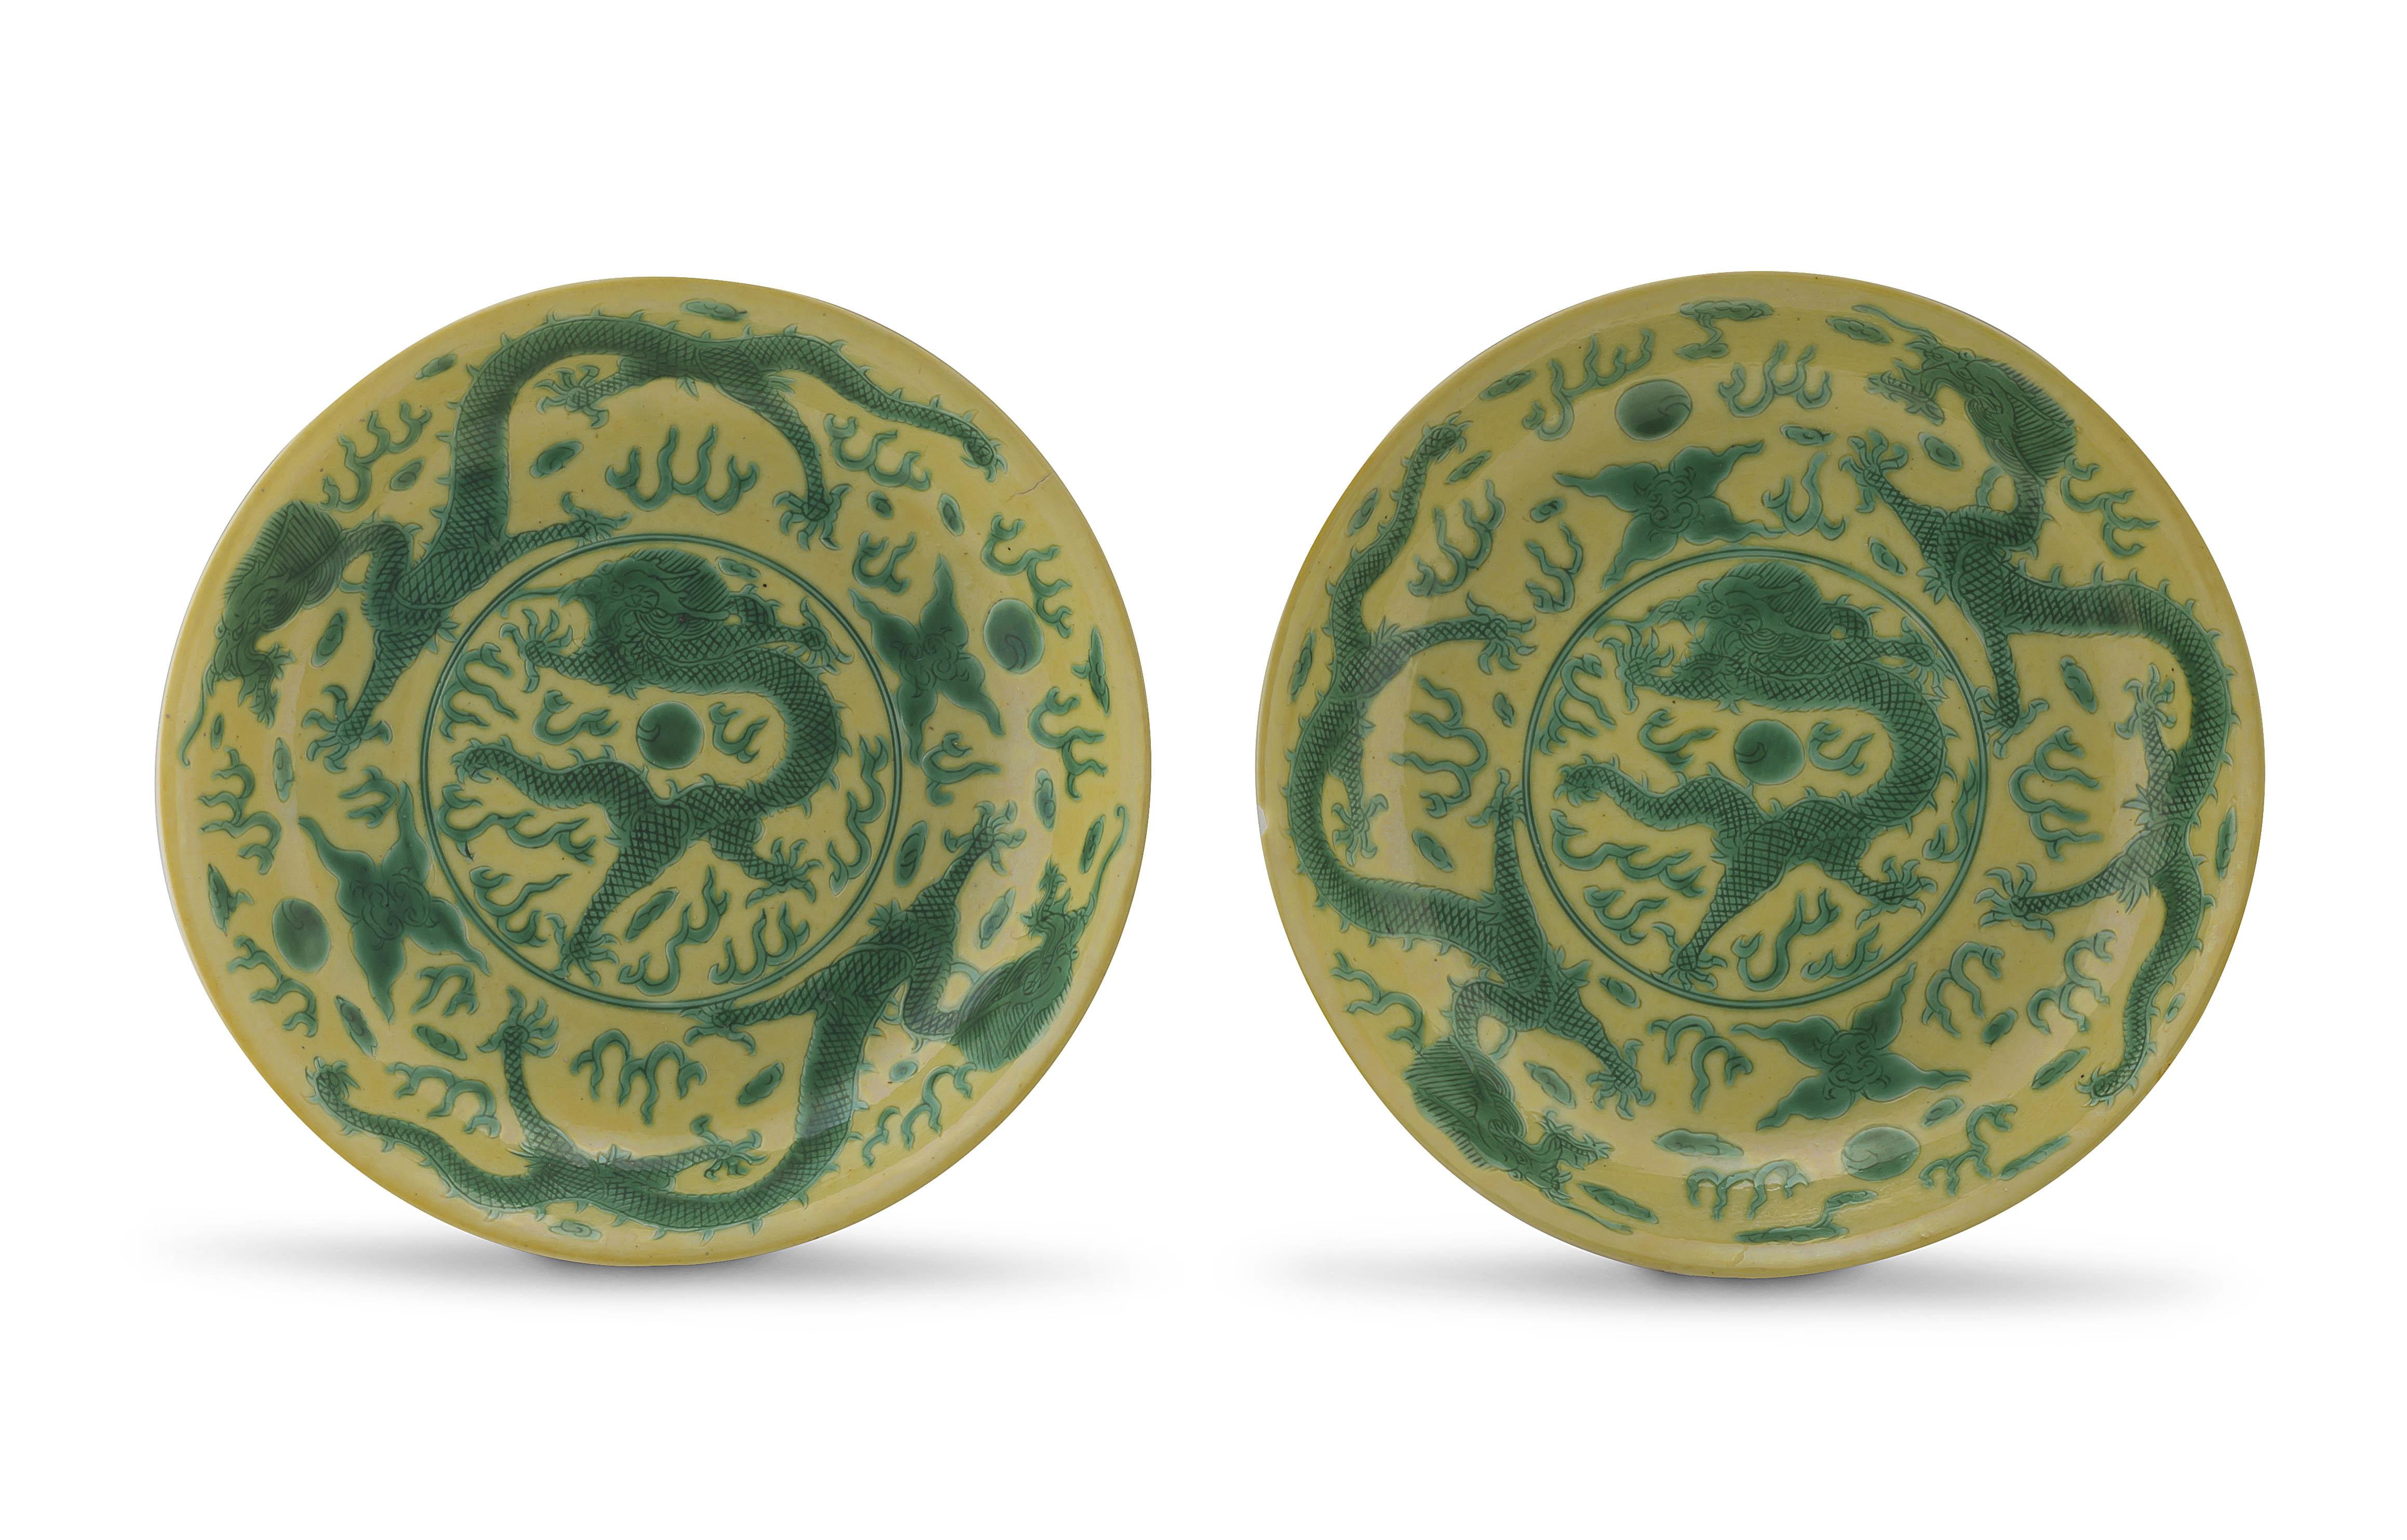 A pair of Chinese yellow and green enamelled dragon dishes, Qing Dynasty, late 19th century